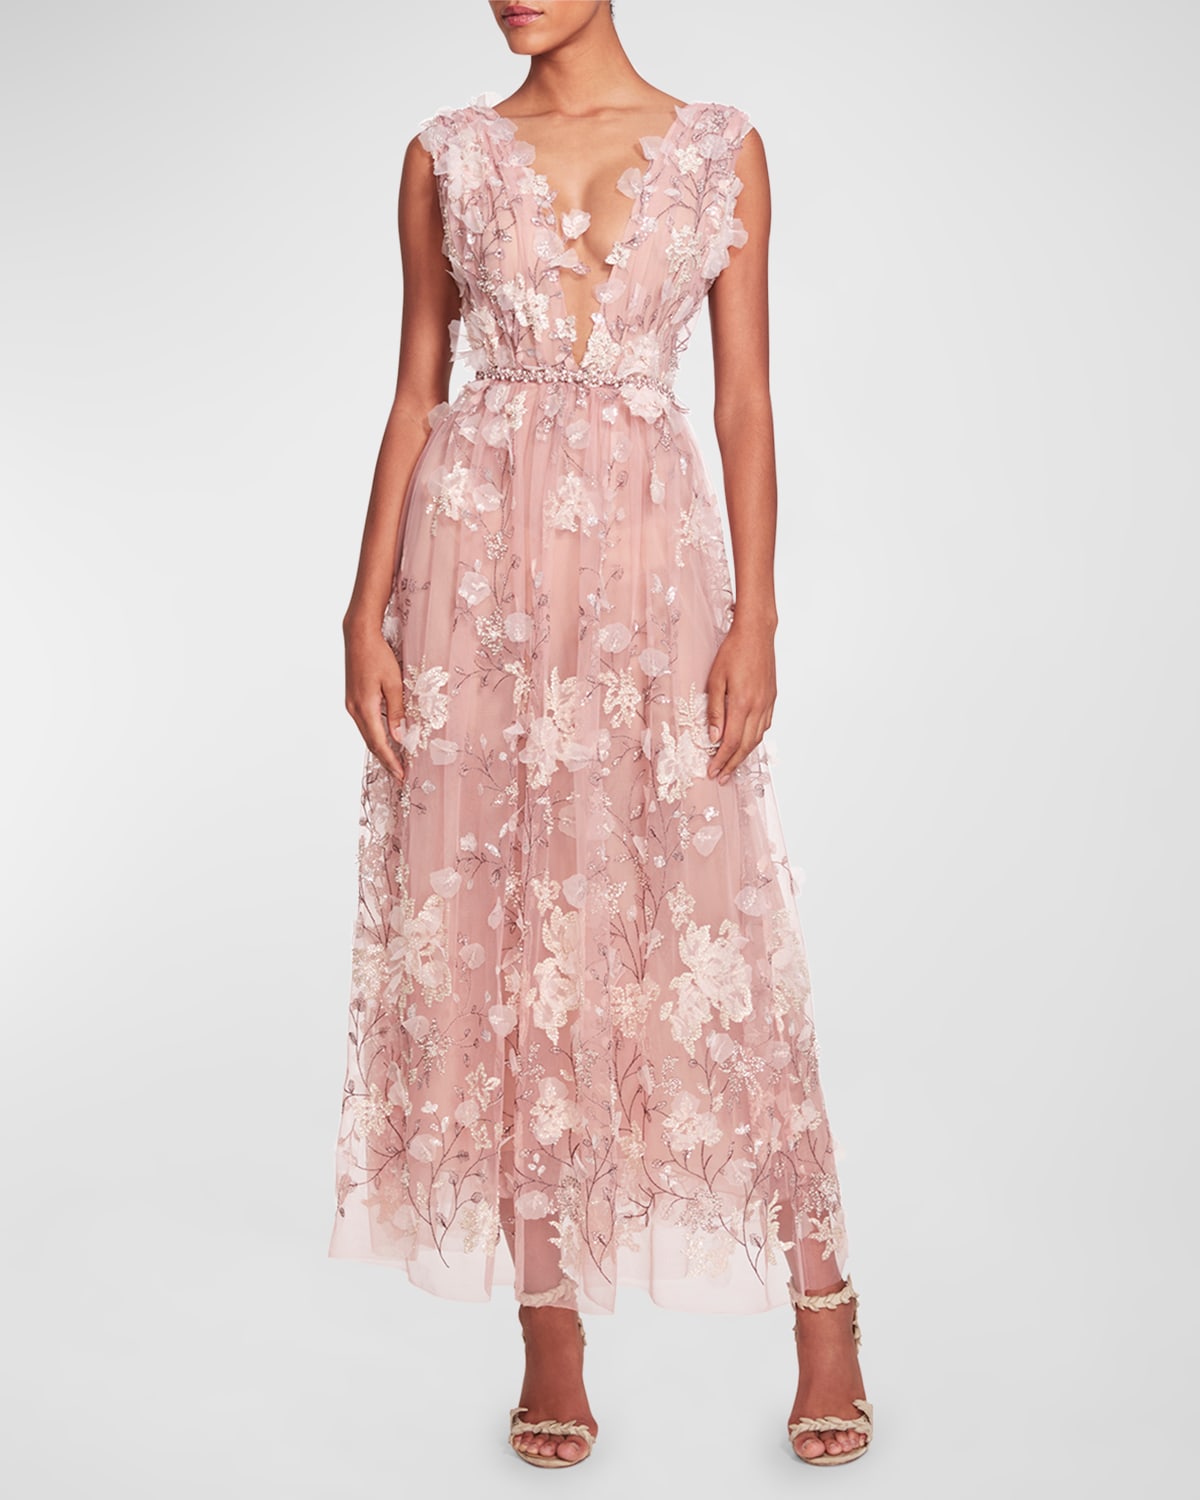 MARCHESA PLUNGING FLORAL APPLIQUE BEADED TULLE MAXI DRESS